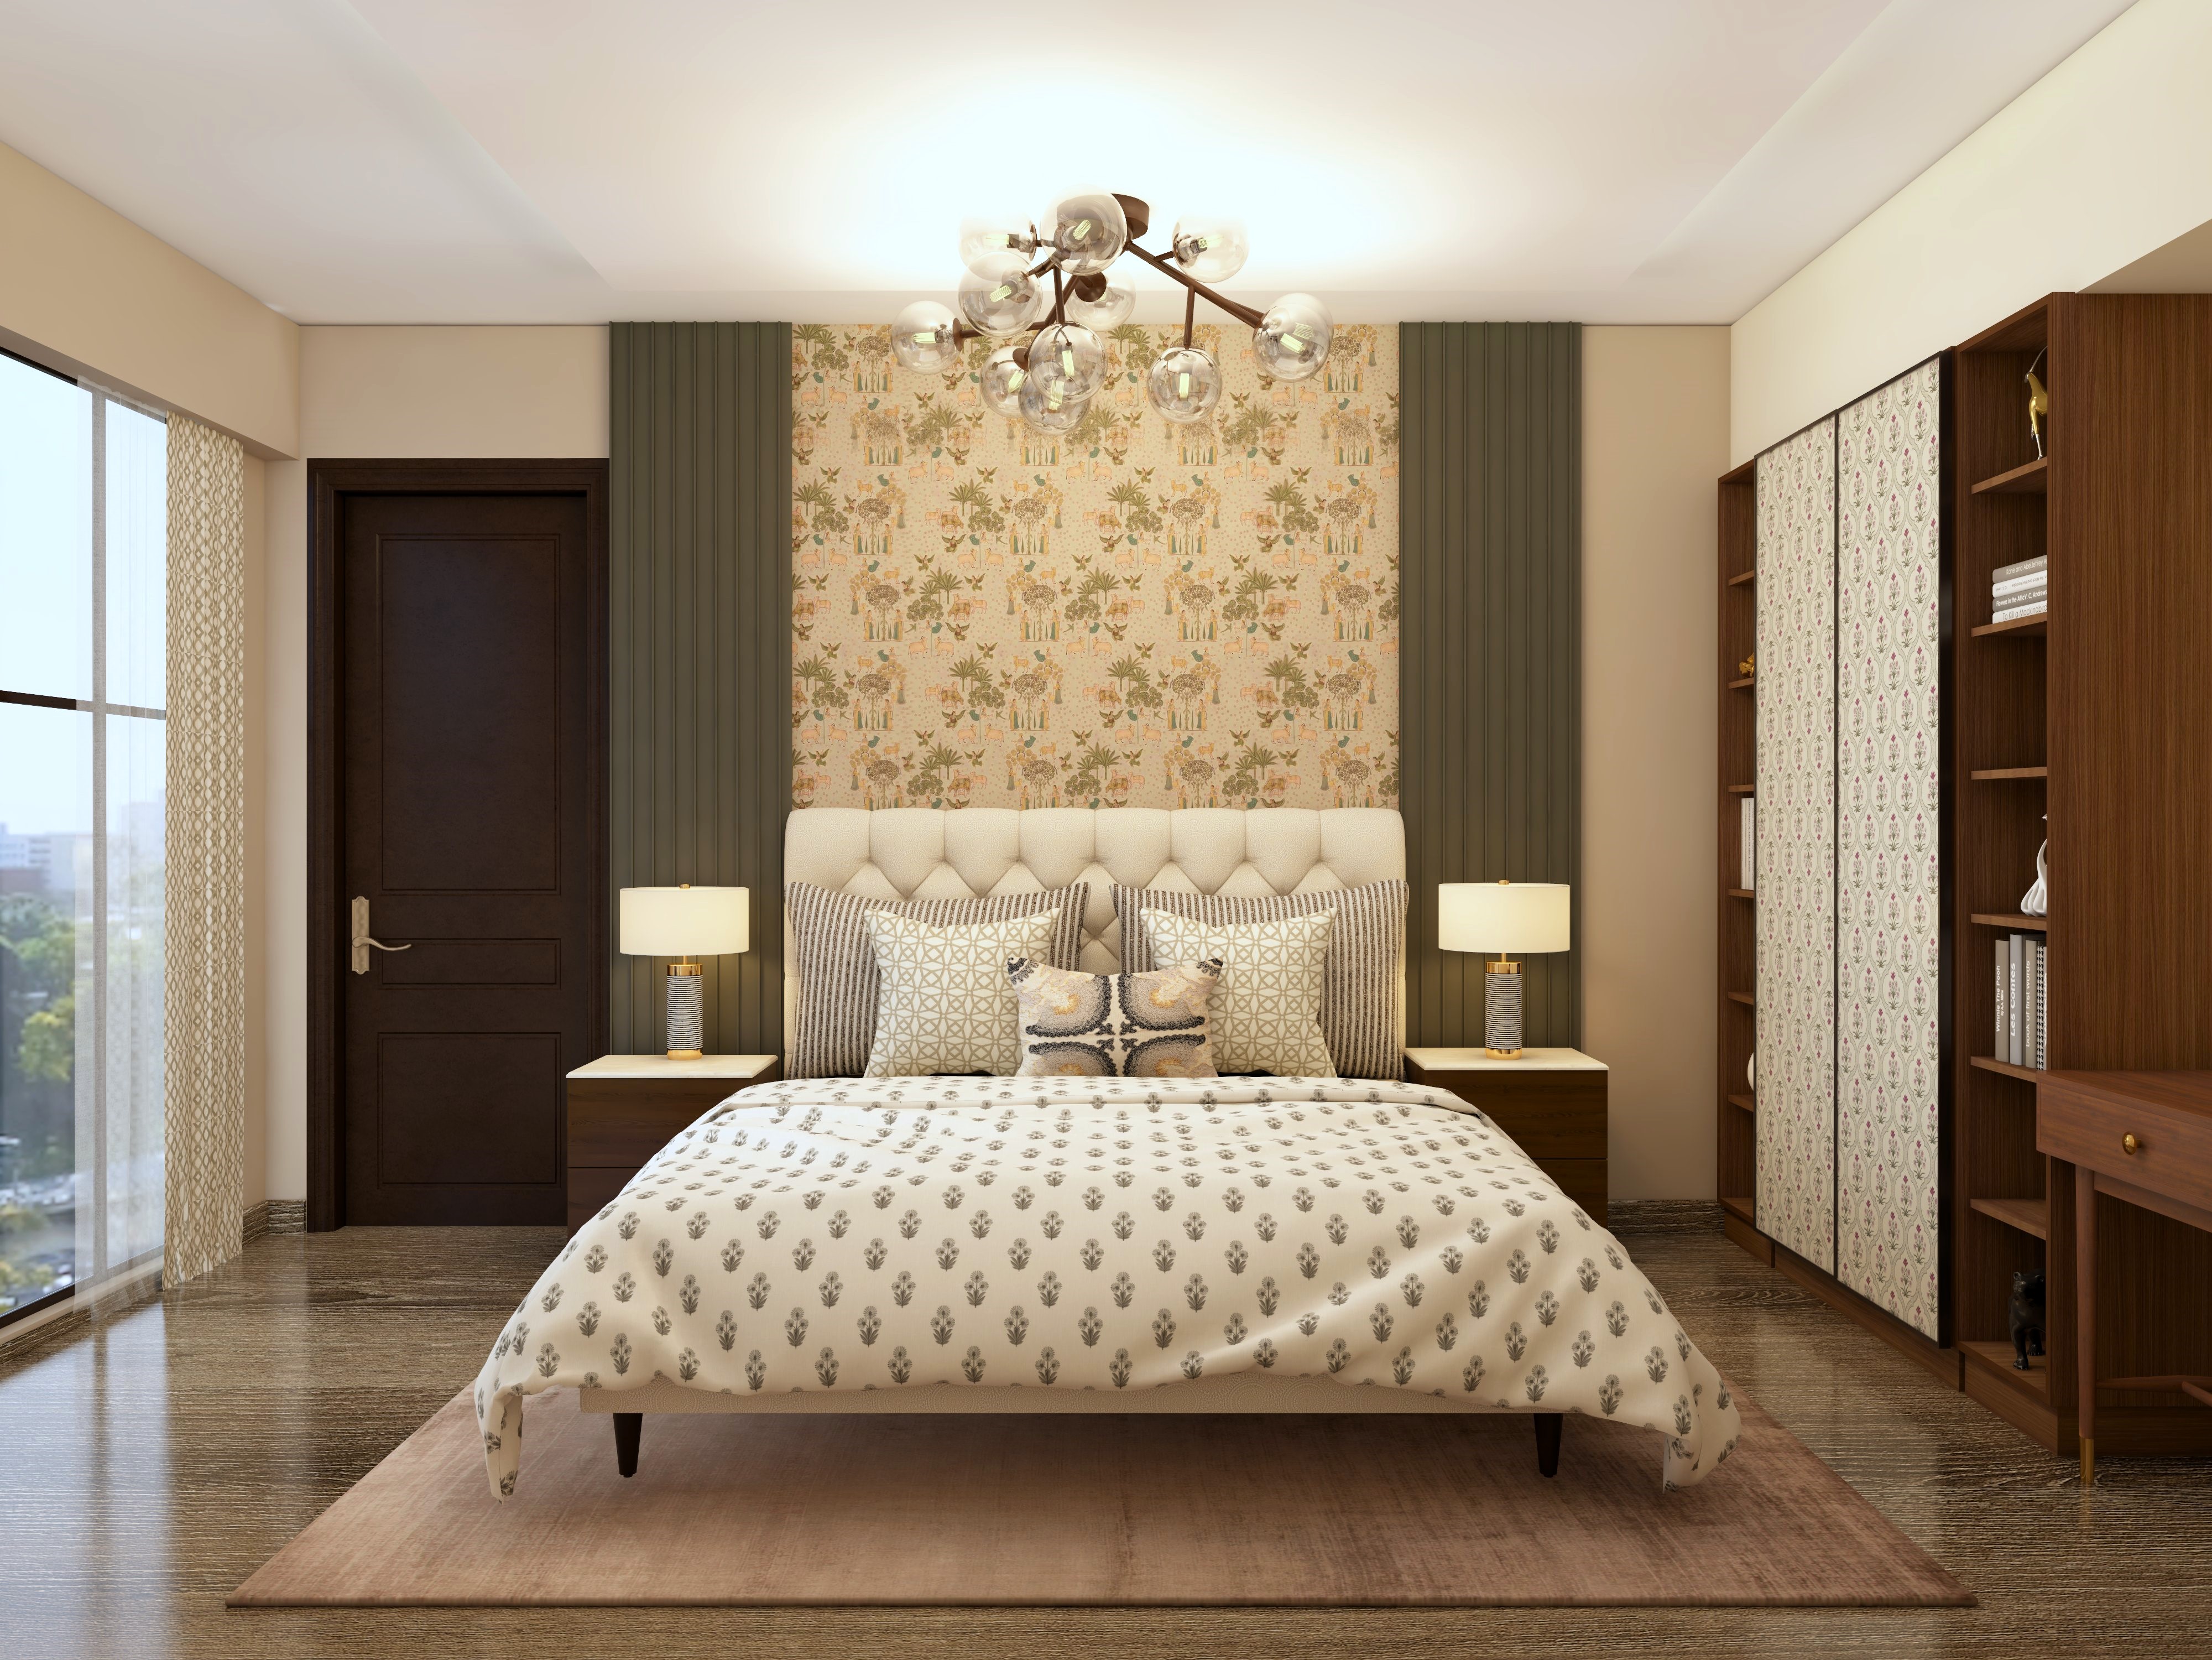 Guest bedroom with AP wallpaper and white upholstered headboard - Beautiful Homes